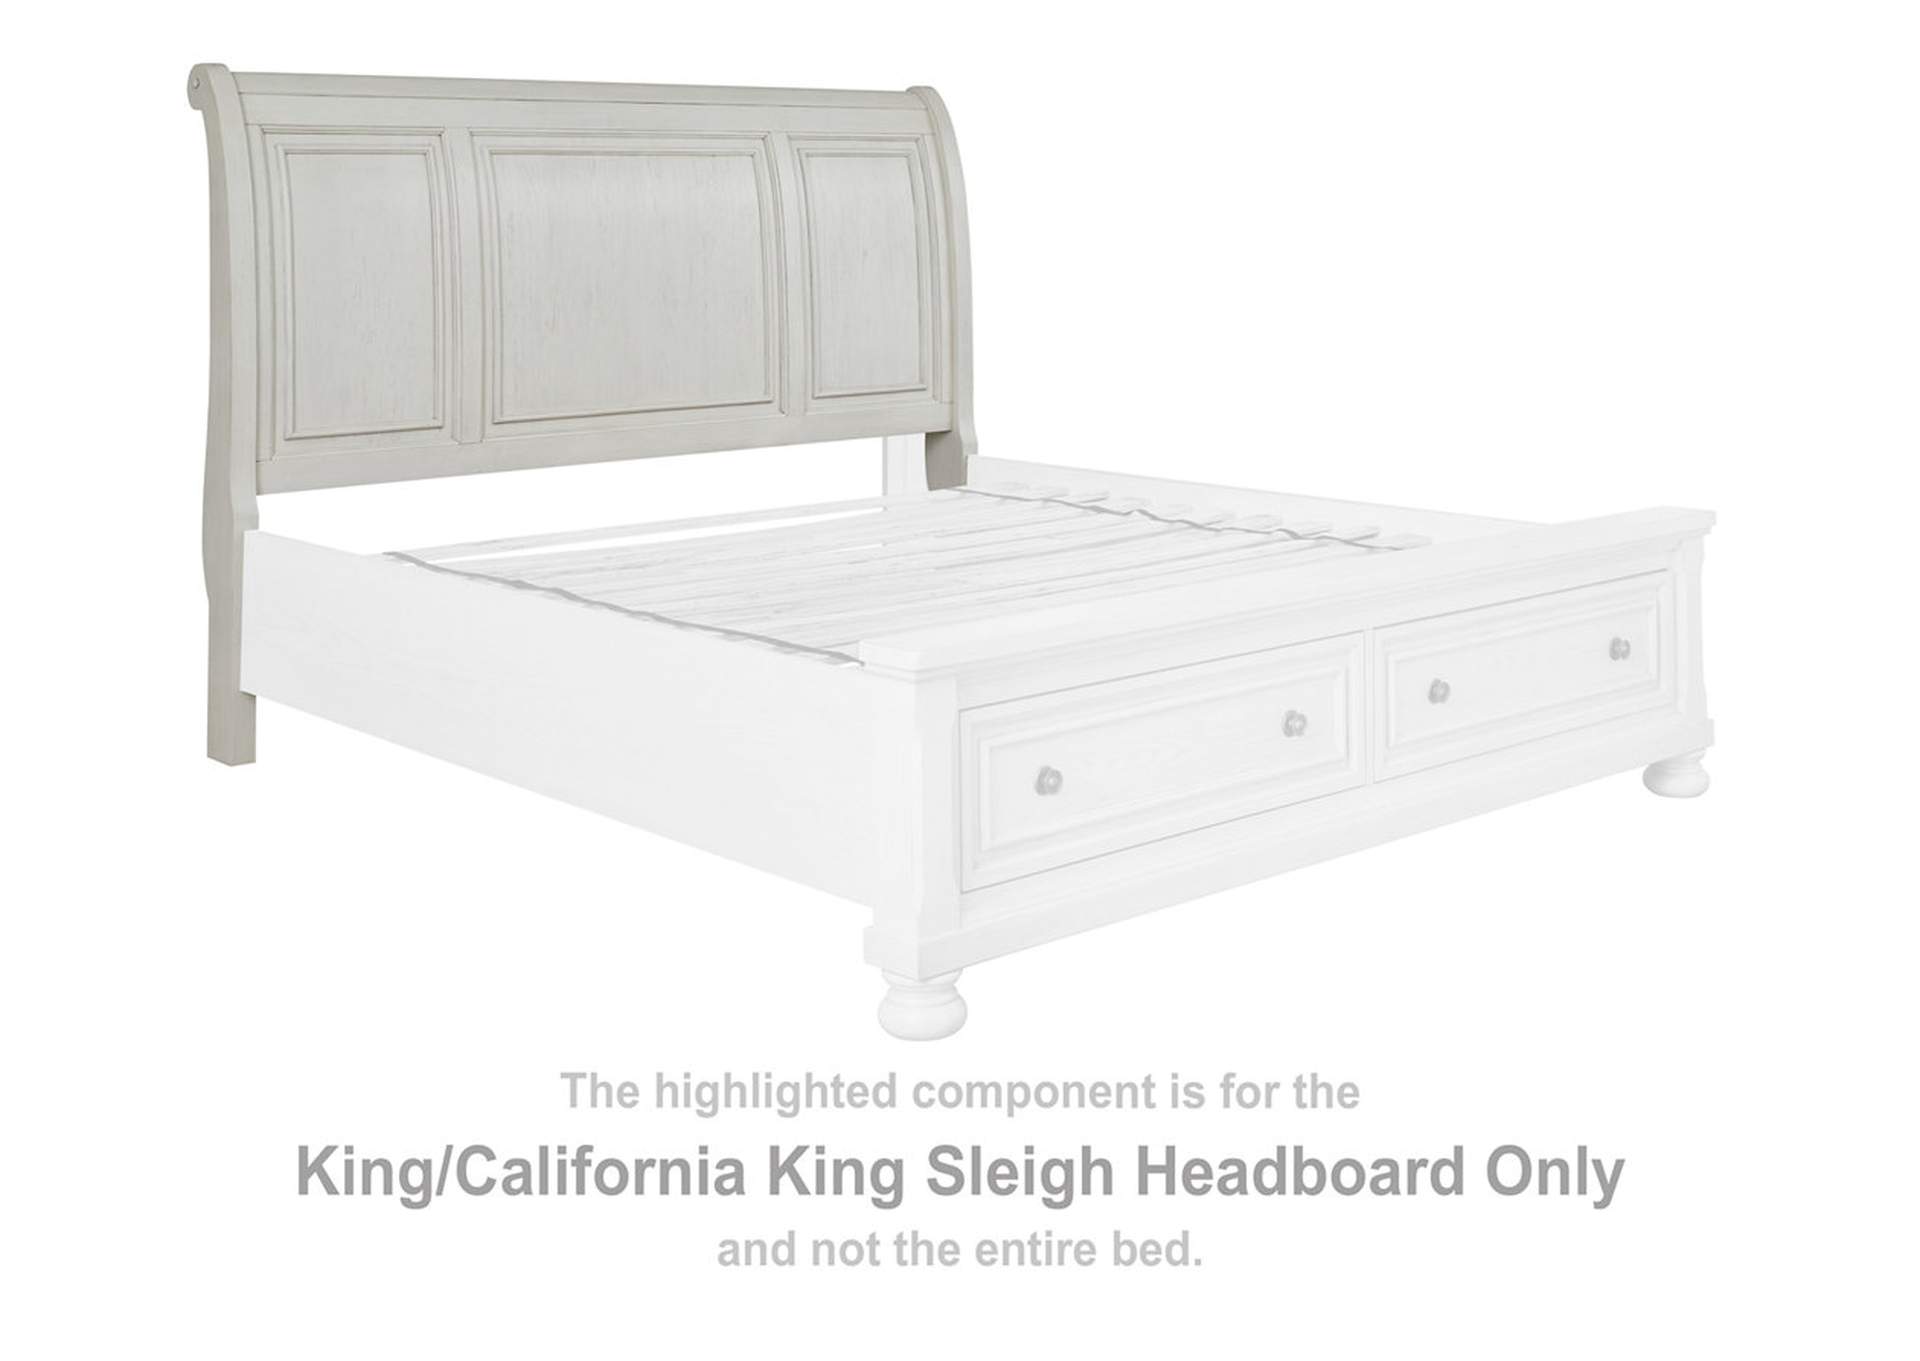 Robbinsdale King Sleigh Bed with Storage,Signature Design By Ashley